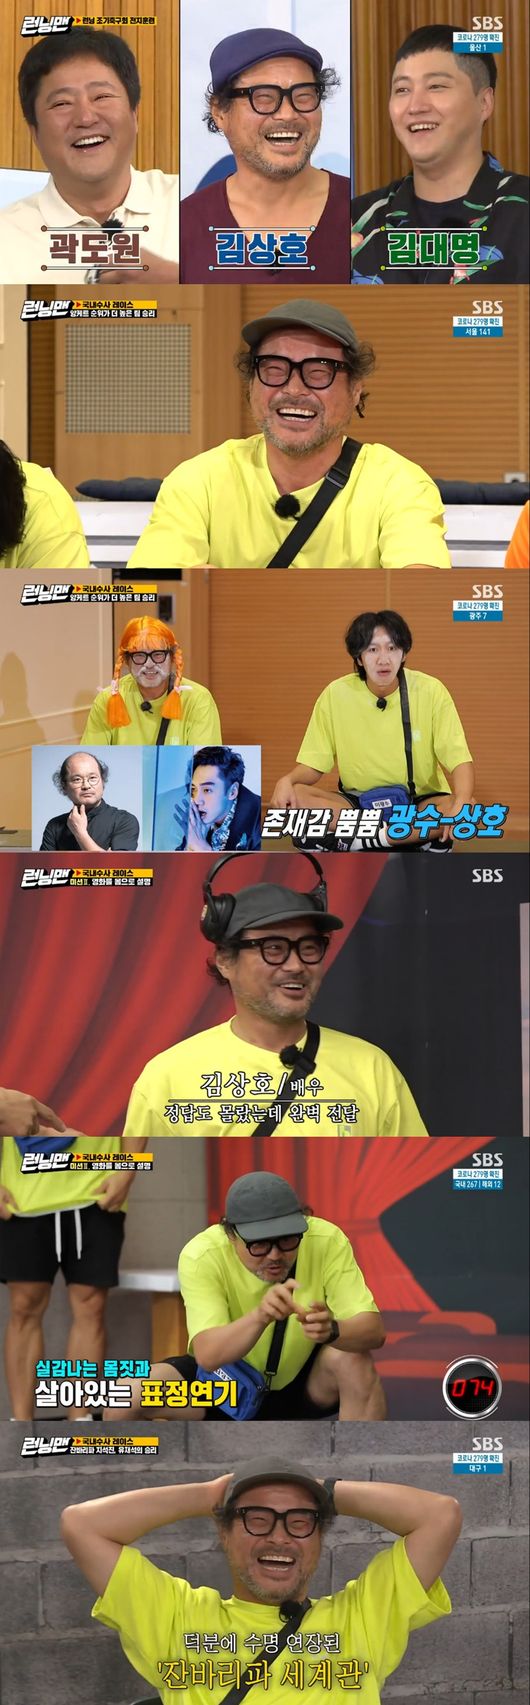 Actor Kim Sang-ho showed off his Moonlighting entertainment feeling by flying to Running ManKim Sang-ho in the SBS entertainment program Running Man broadcasted on the 16th attracted the attention of viewers by showing a special adaptability by unfolding the domestic Susa Race for the Convict elimination.Kim Sang-ho was put into early soccer club with Kwak Do-won and Kim Dae-myeong as a new mercenary.It was also suspected of smuggling salt for a while and began missions to narrow the range of The Convict.First, in the first ranking guess game, Kim Sang-ho, unlike his relaxed attitude, was caught in a series of penalties and caused laughter.Especially, all the penalties were digested in their own style and robbed of their gaze, leading to a reaction that it was not Kim Sang-ho Game.Kim Sang-ho, in the mission to explain the movie with his body, impressed everyone by bringing out the gestures of the team members with detailed acting skills and various expressions.In addition, his extraordinary expressive power attracted the viewers immersion and confirmed the dignity of the luxury actor.In the race, which started in earnest after narrowing the scope of The Convict, Kim Sang-ho threw a suspicious comment and added confusion, but he made the game more exciting.Moreover, Yoo Jae-Suk, who was The Convict, doubled the fun by giving strength to the maintenance of the world view of Zanbaripa by Ji Seok-jin.Kim Sang-ho has also emanated a unique presence with Moonlighting adaptability and unexpected loveliness in entertainment.Here, Kim Sang-hos character digestive power fascinated the home theater, glowing from penalties to missions.In addition, expectations for the charter ship in International Susa, which Kim Sang-ho, who gave a big smile with unexpected entertainment, have also increased.SBS is provided.